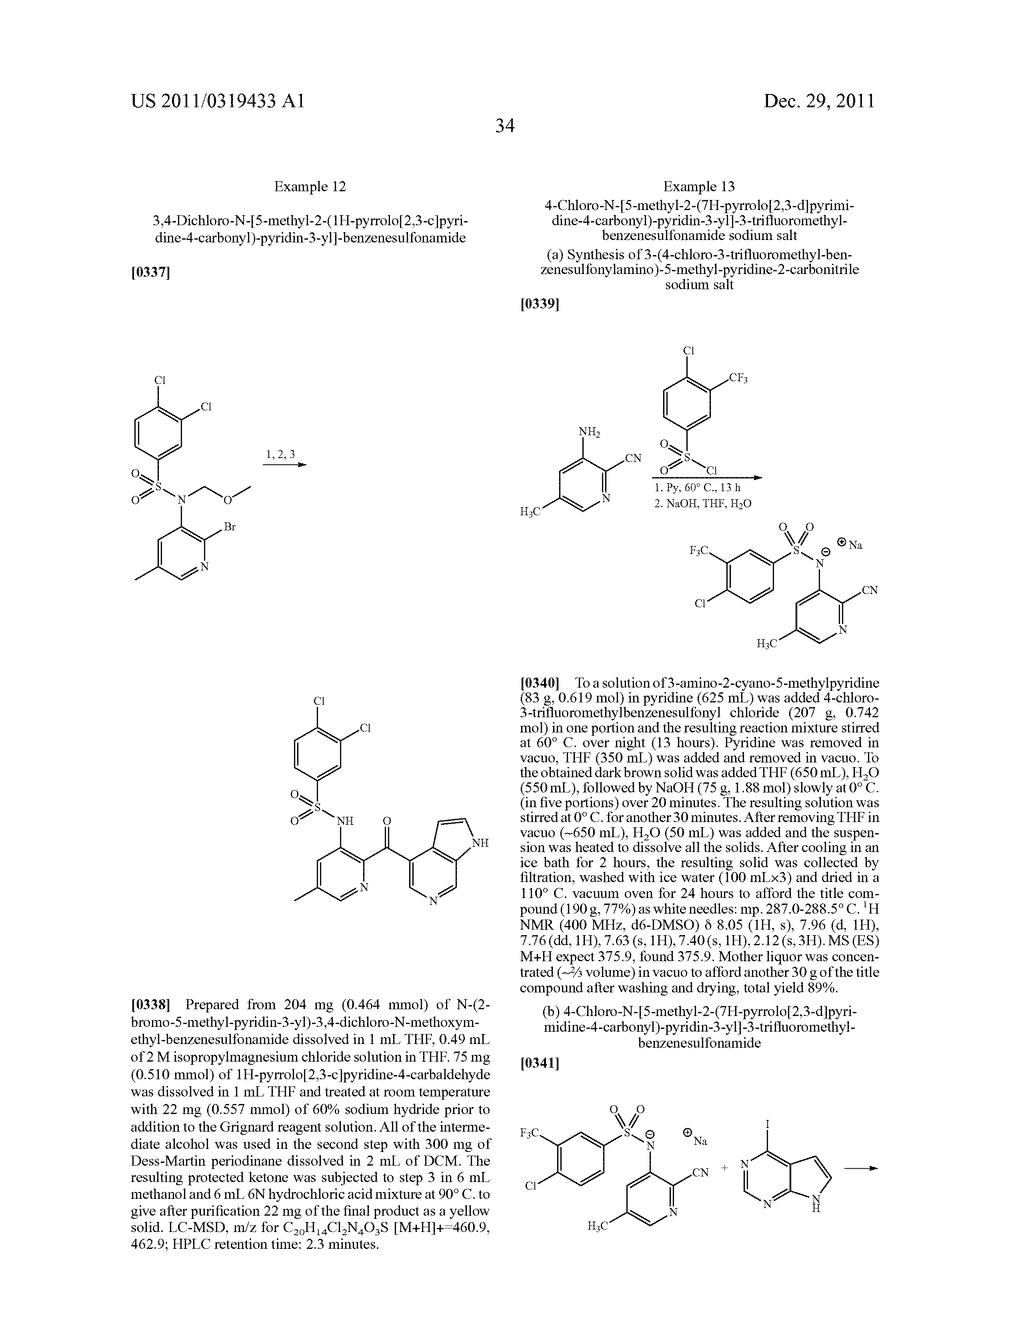 FUSED HETEROARYL PYRIDYL AND PHENYL BENZENESUFLONAMIDES AS CCR2 MODULATORS     FOR THE TREATMENT OF INFLAMMATION - diagram, schematic, and image 36